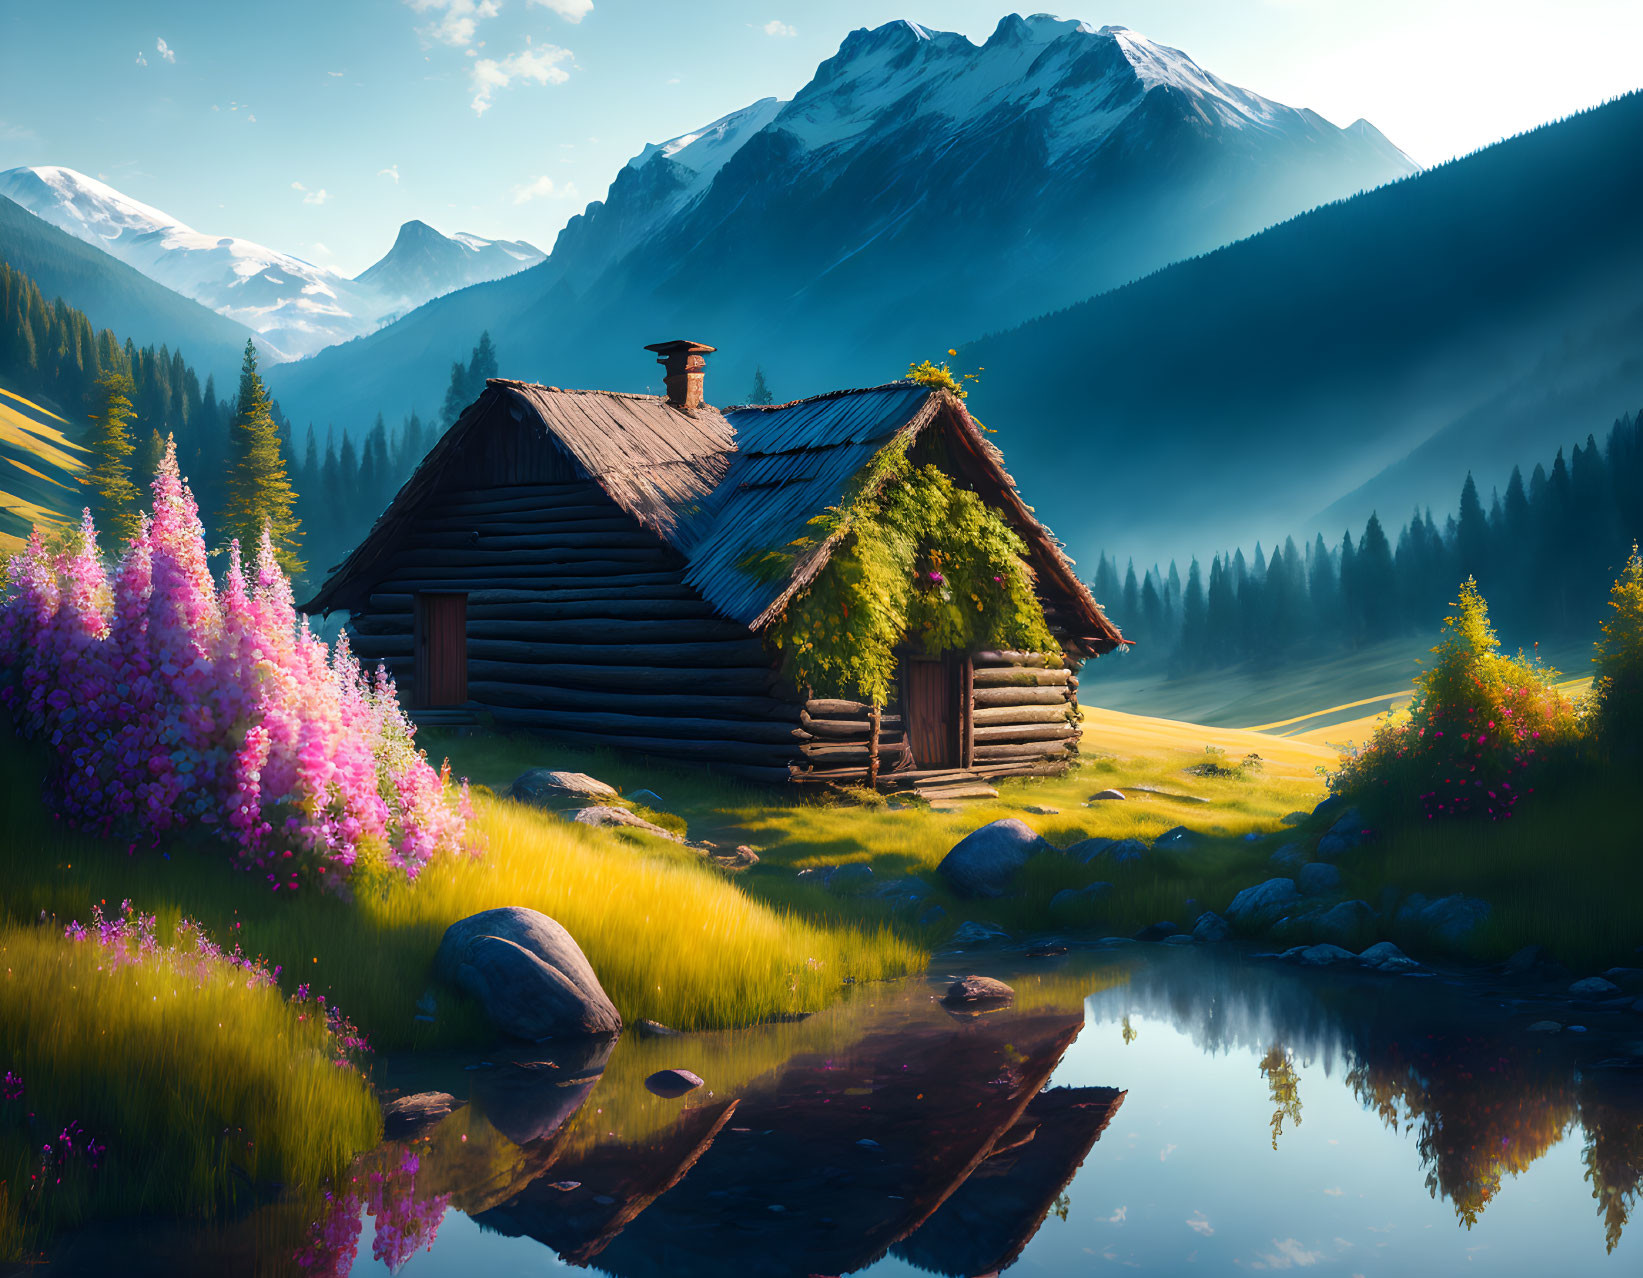 Tranquil log cabin surrounded by blooming flowers and mountains